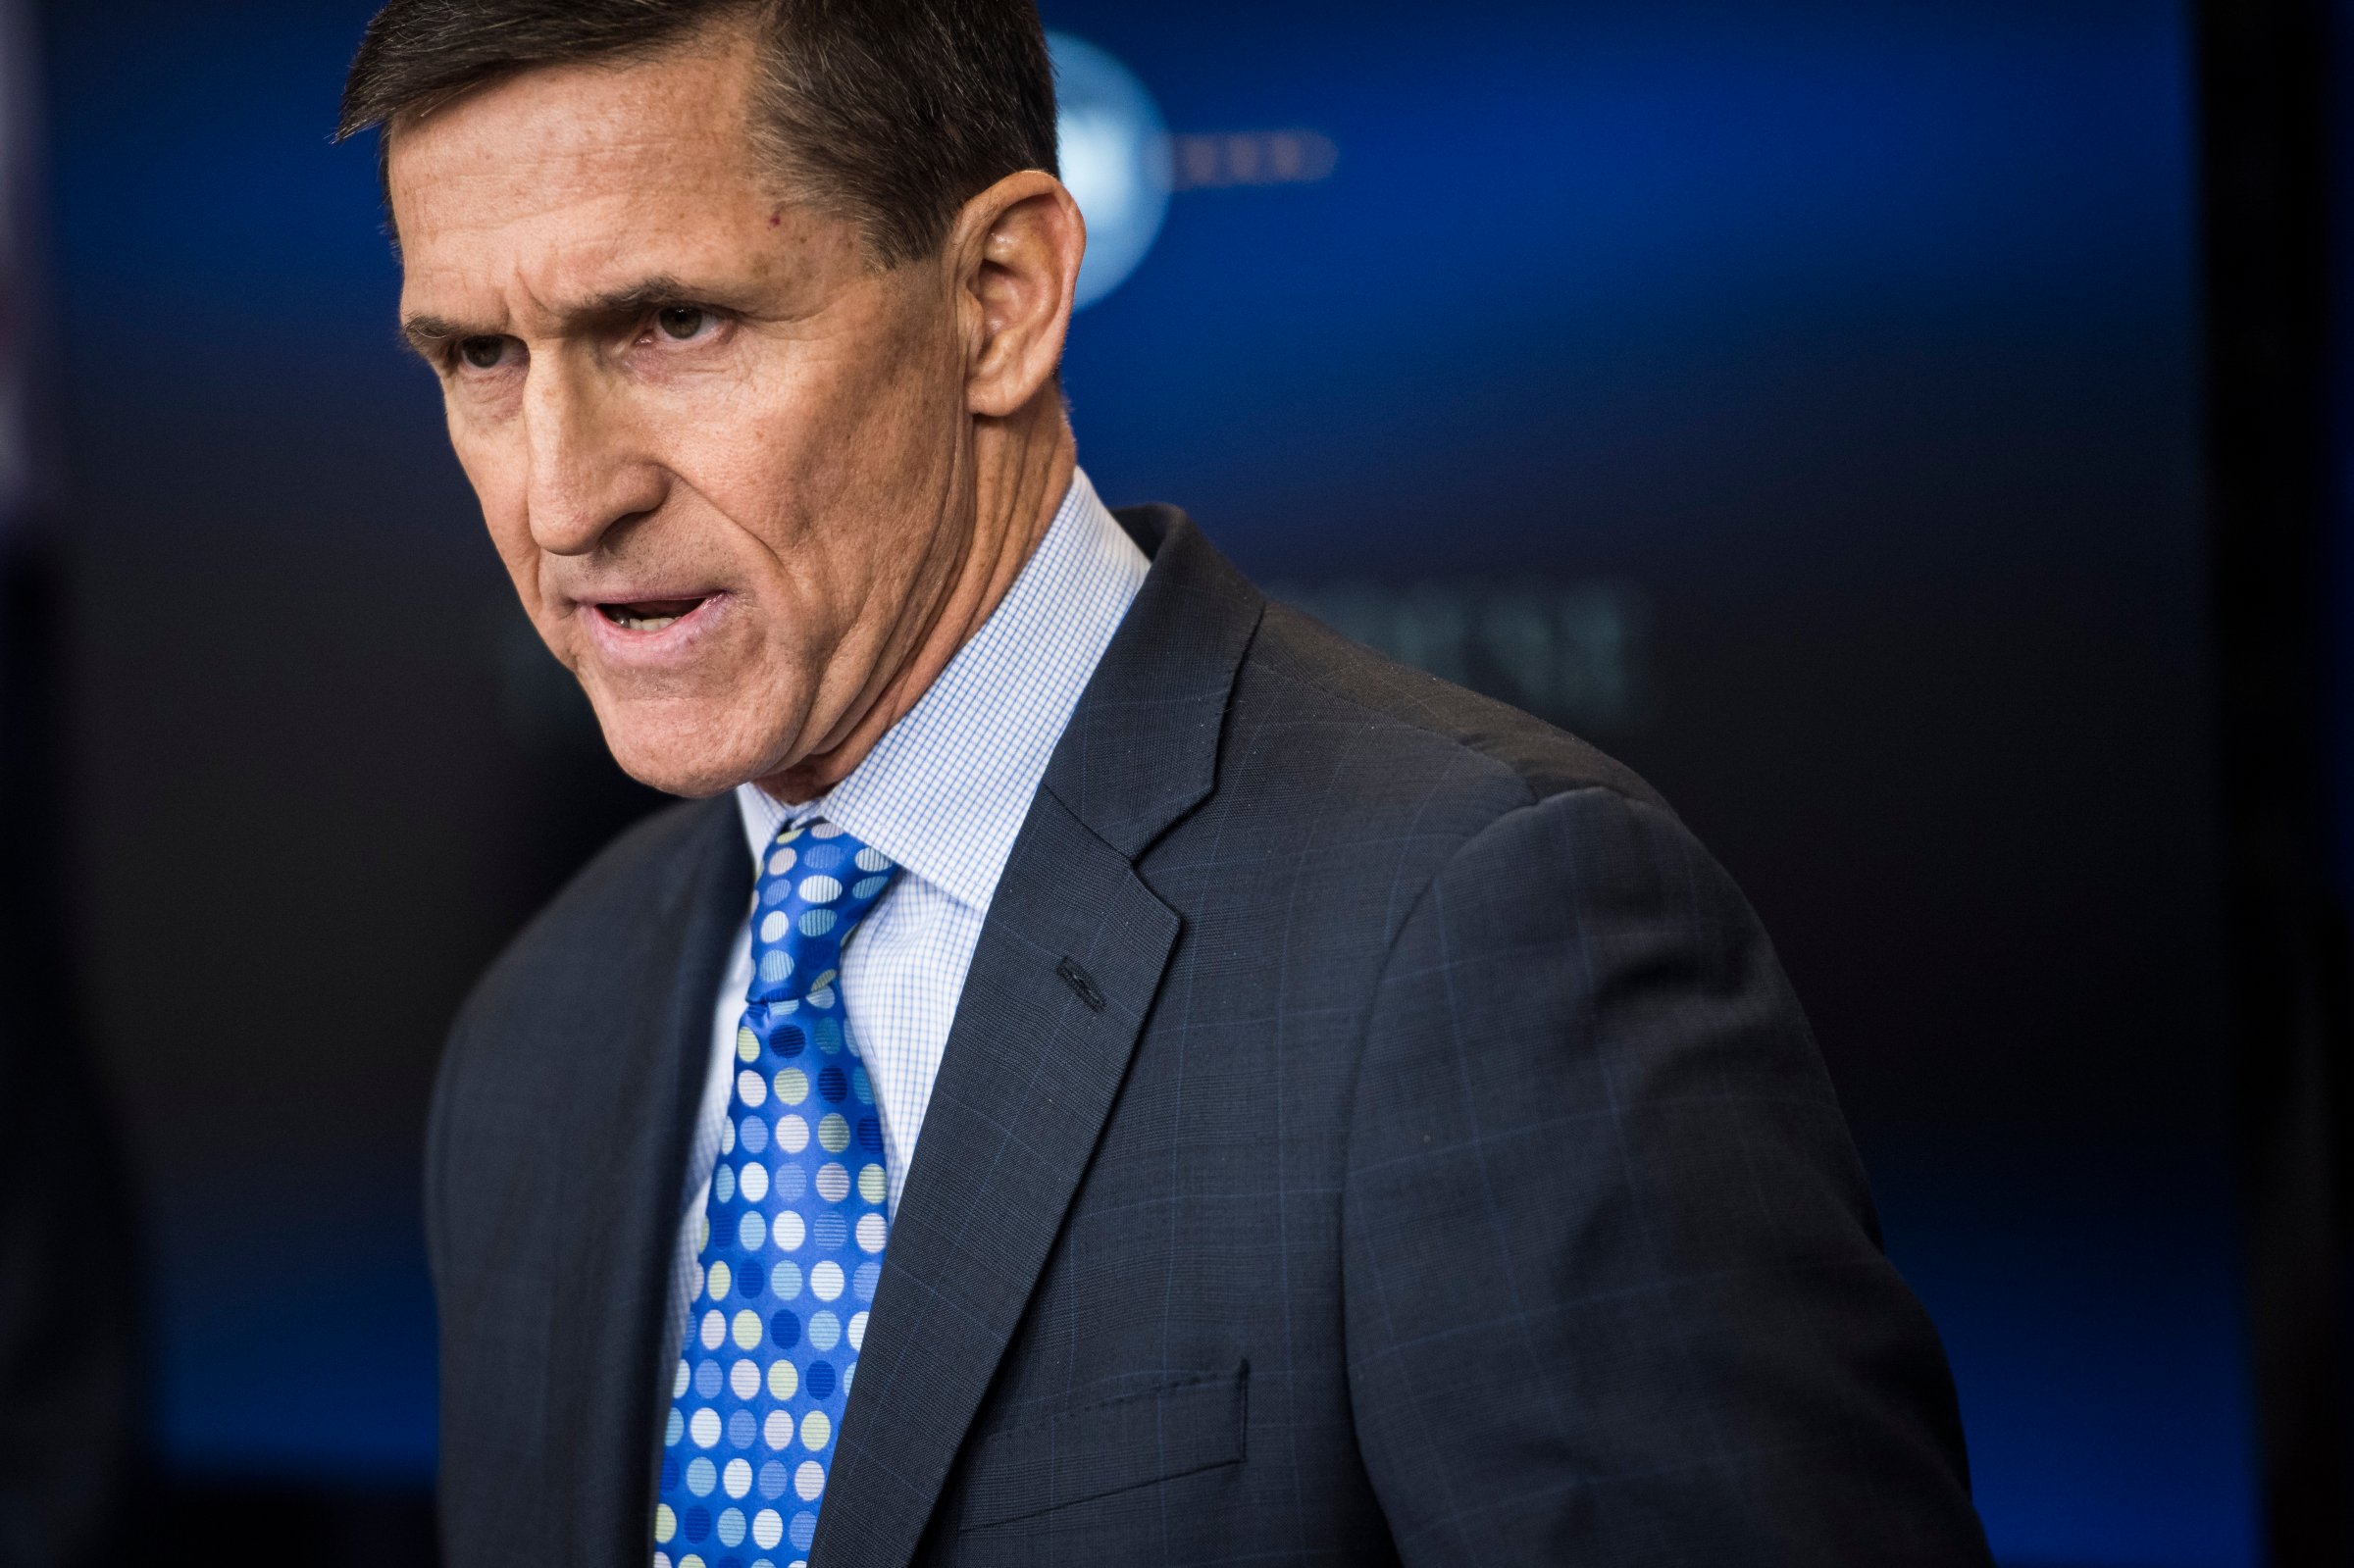 Former National Security Adviser Michael Flynn speaks in the James S. Brady Press Briefing Room during the daily news briefing at the White House in Washington, D.C. on Feb. 1, 2017.